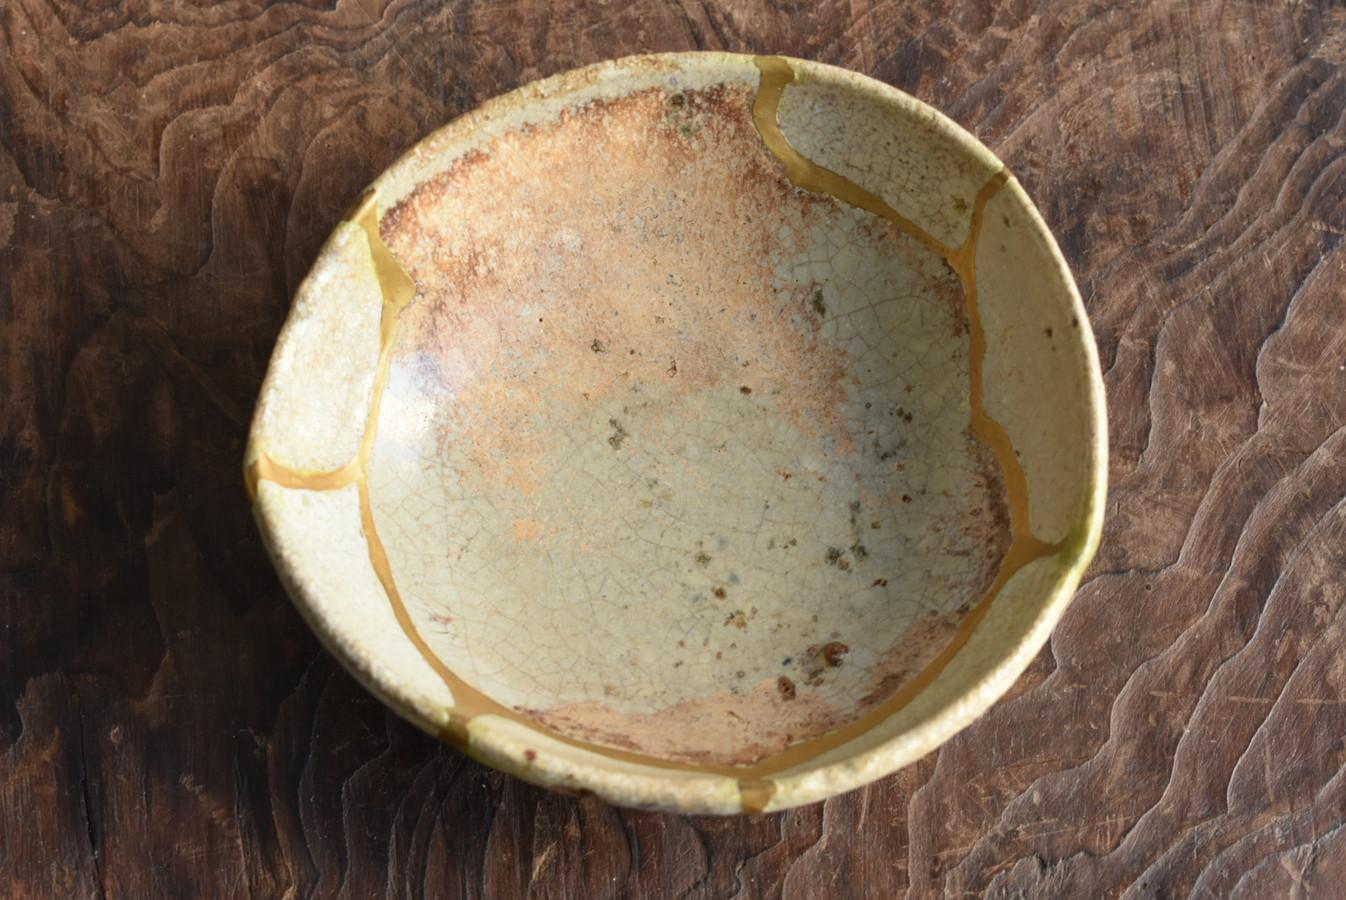 This is a Karatsu-yaki small plate.
Karatsu is a historic pottery located in Saga Prefecture (a large island in the south of Japan).
The location of the kiln in Karatsu is marked with a red circle in the photo.
This is a work from the Momoyama